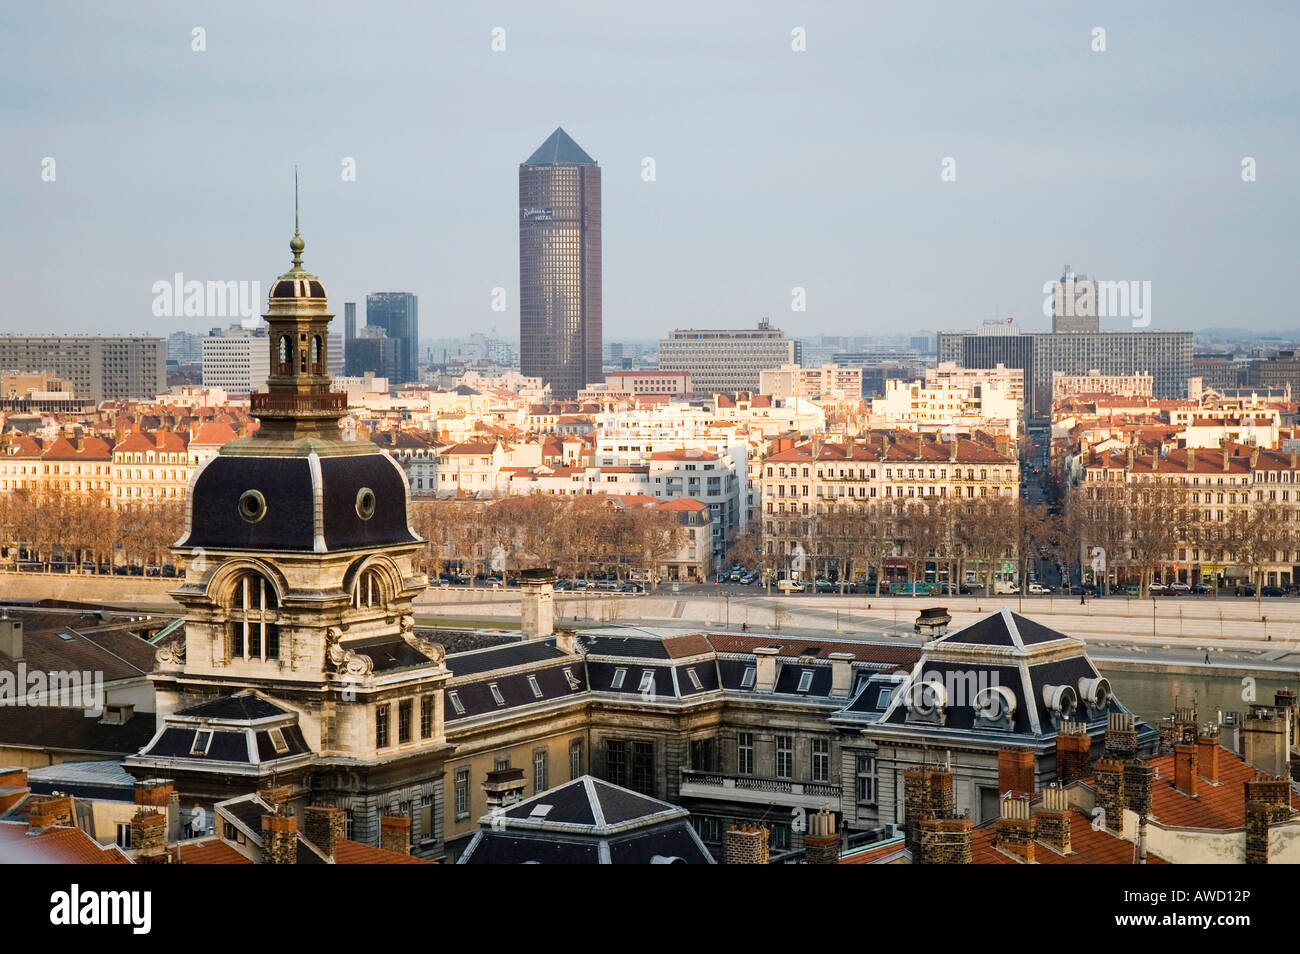 View over the roofs of Lyon with Hotel Dieu (hospital) and le Crayon (Radisson Hotel), France Stock Photo